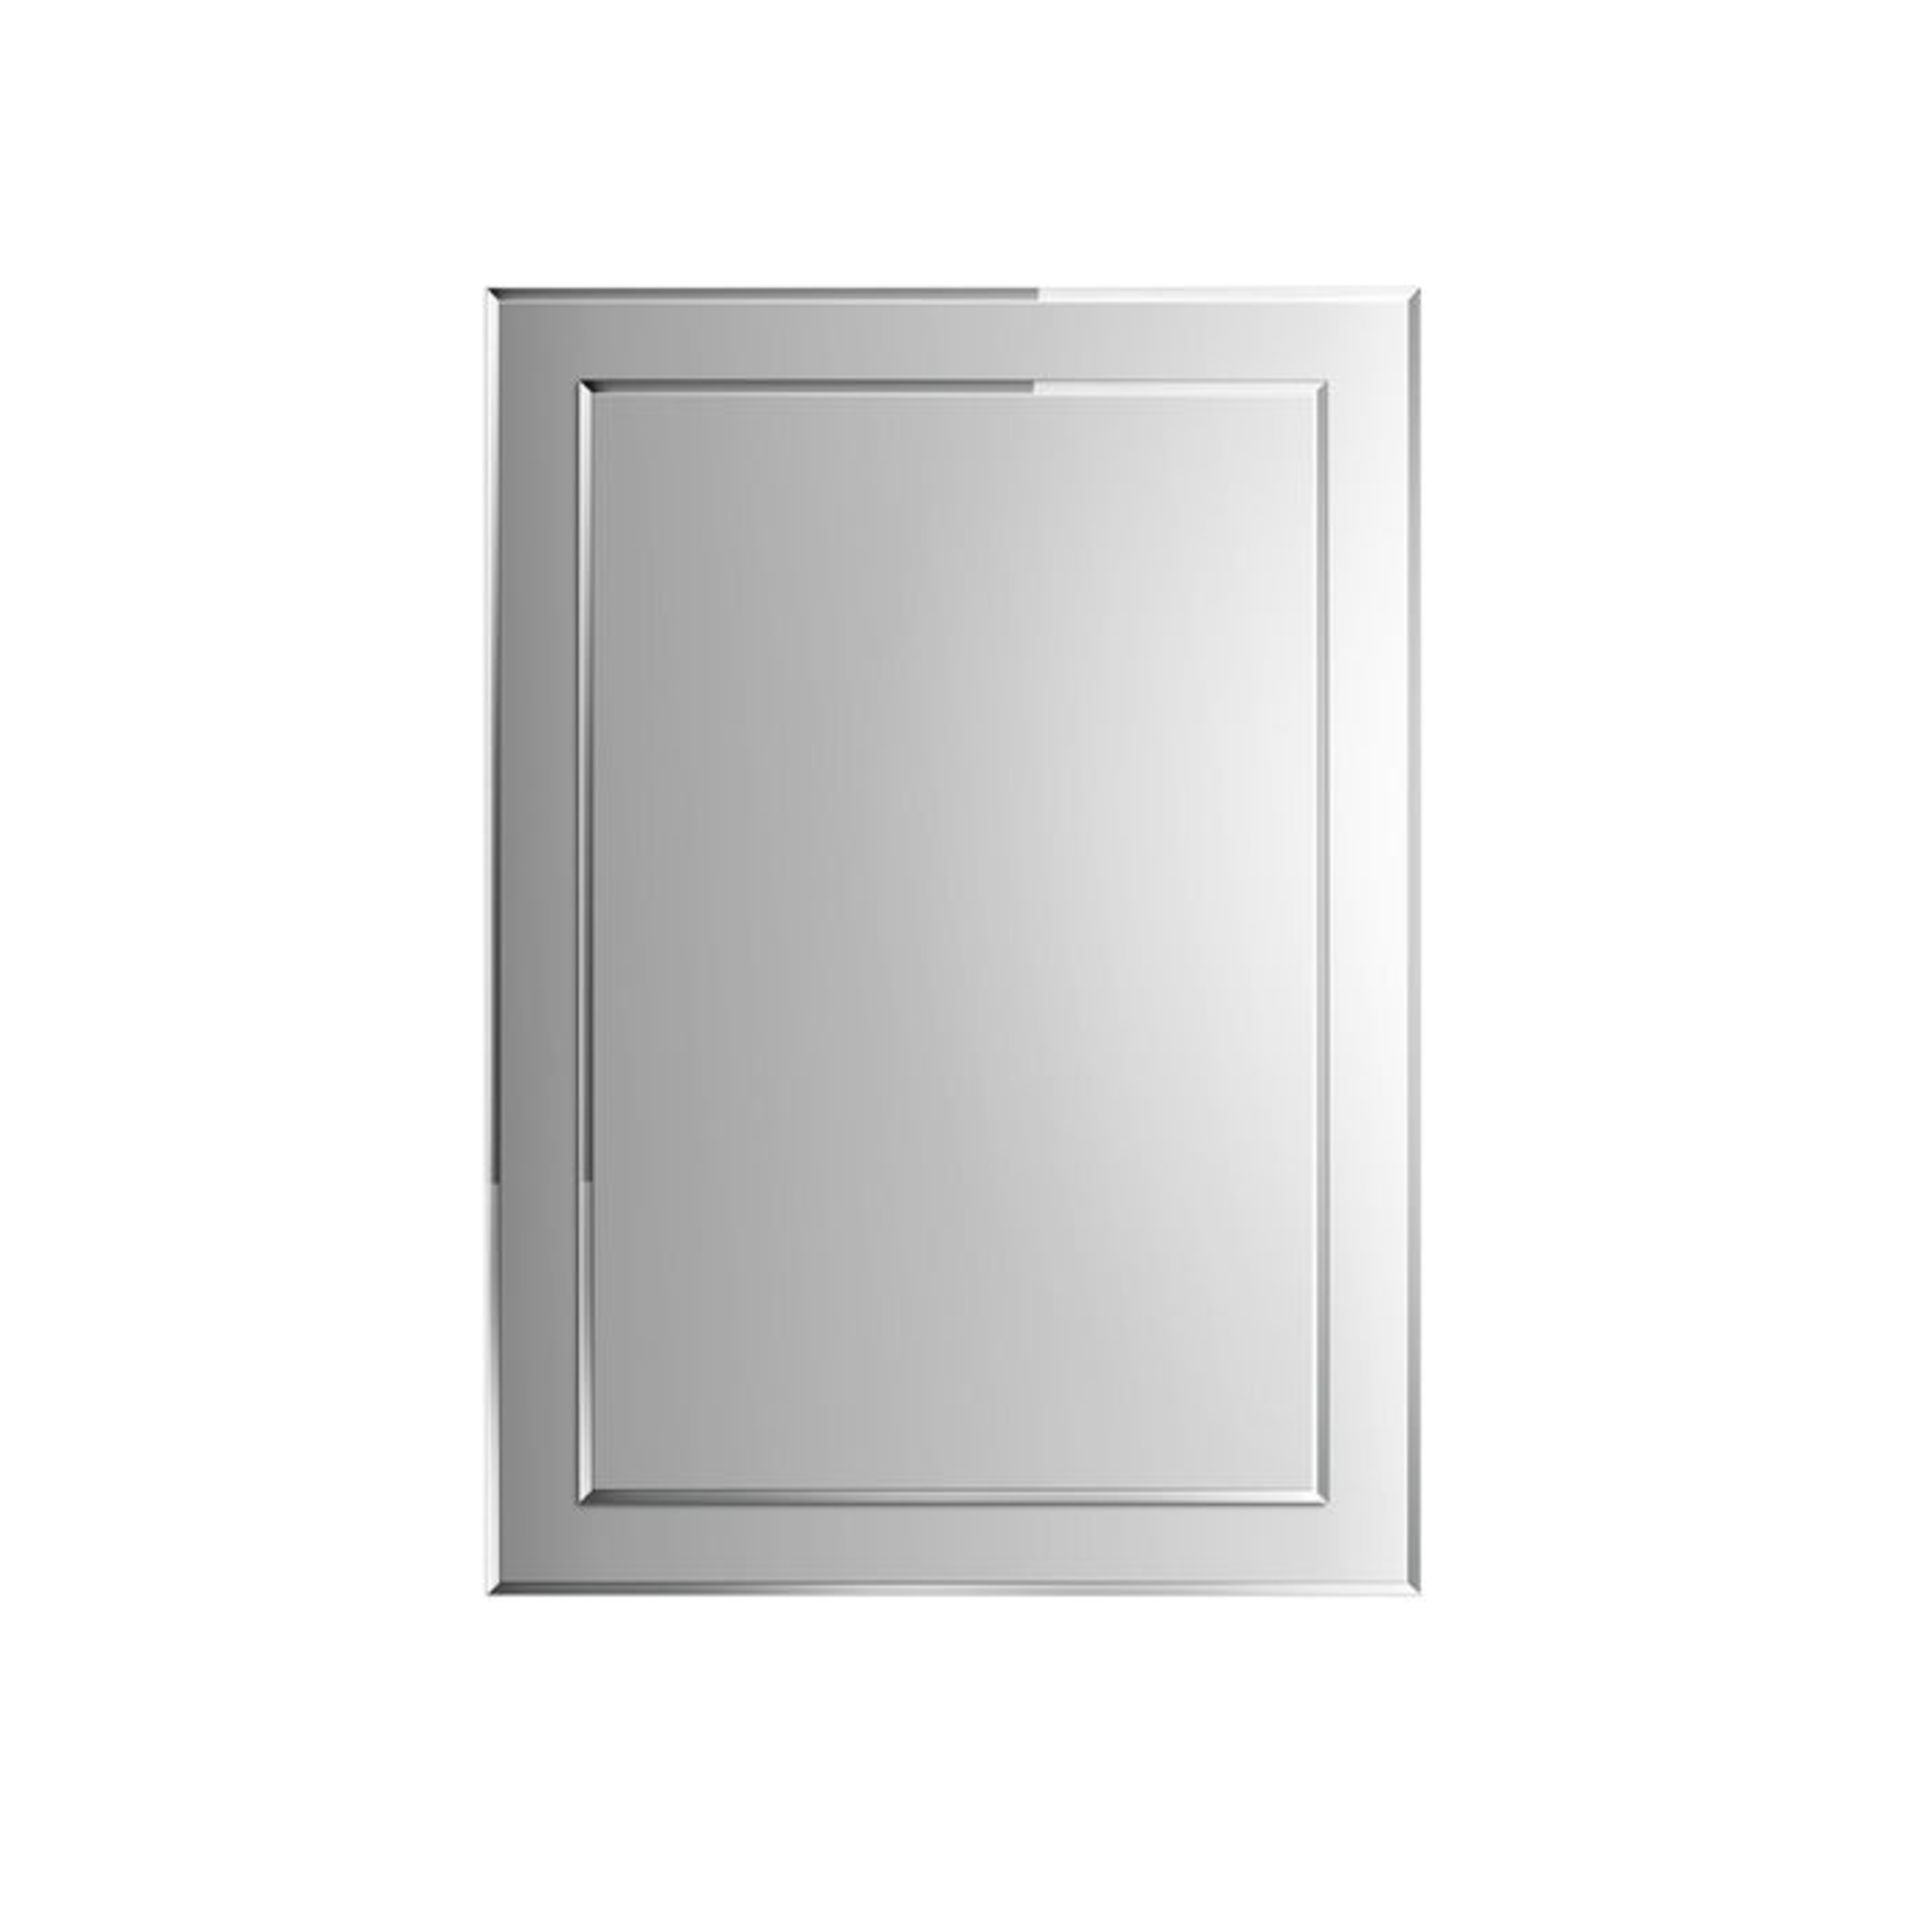 (LP82) 500x700mm Bevel Mirror. Comes fully assembled for added convenience Versatile with a choice - Image 2 of 2